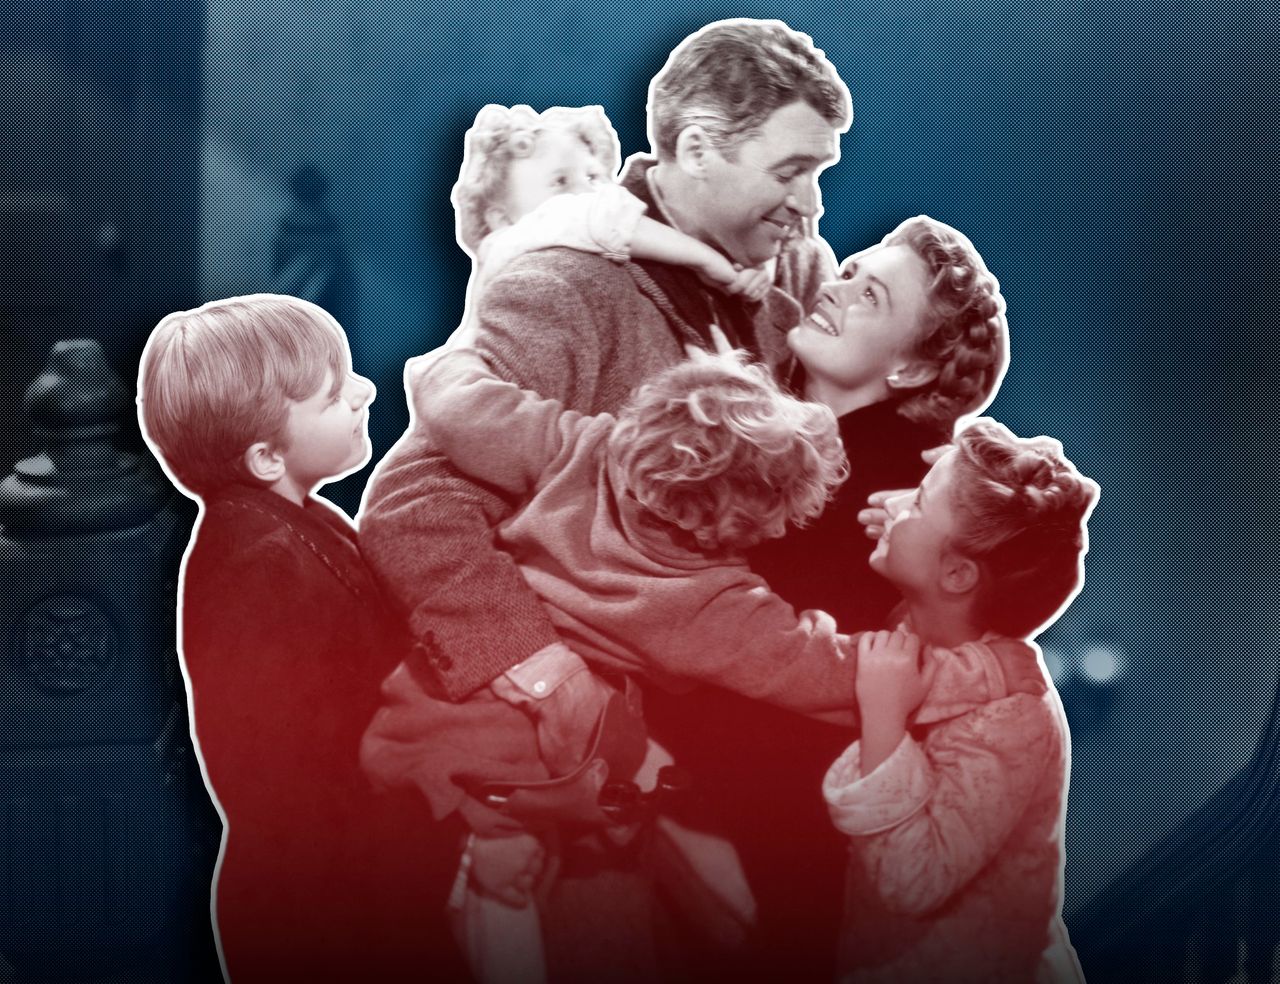 The resurrection of Frank Capra's "It’s A Wonderful Life" was almost as strange as its creation.